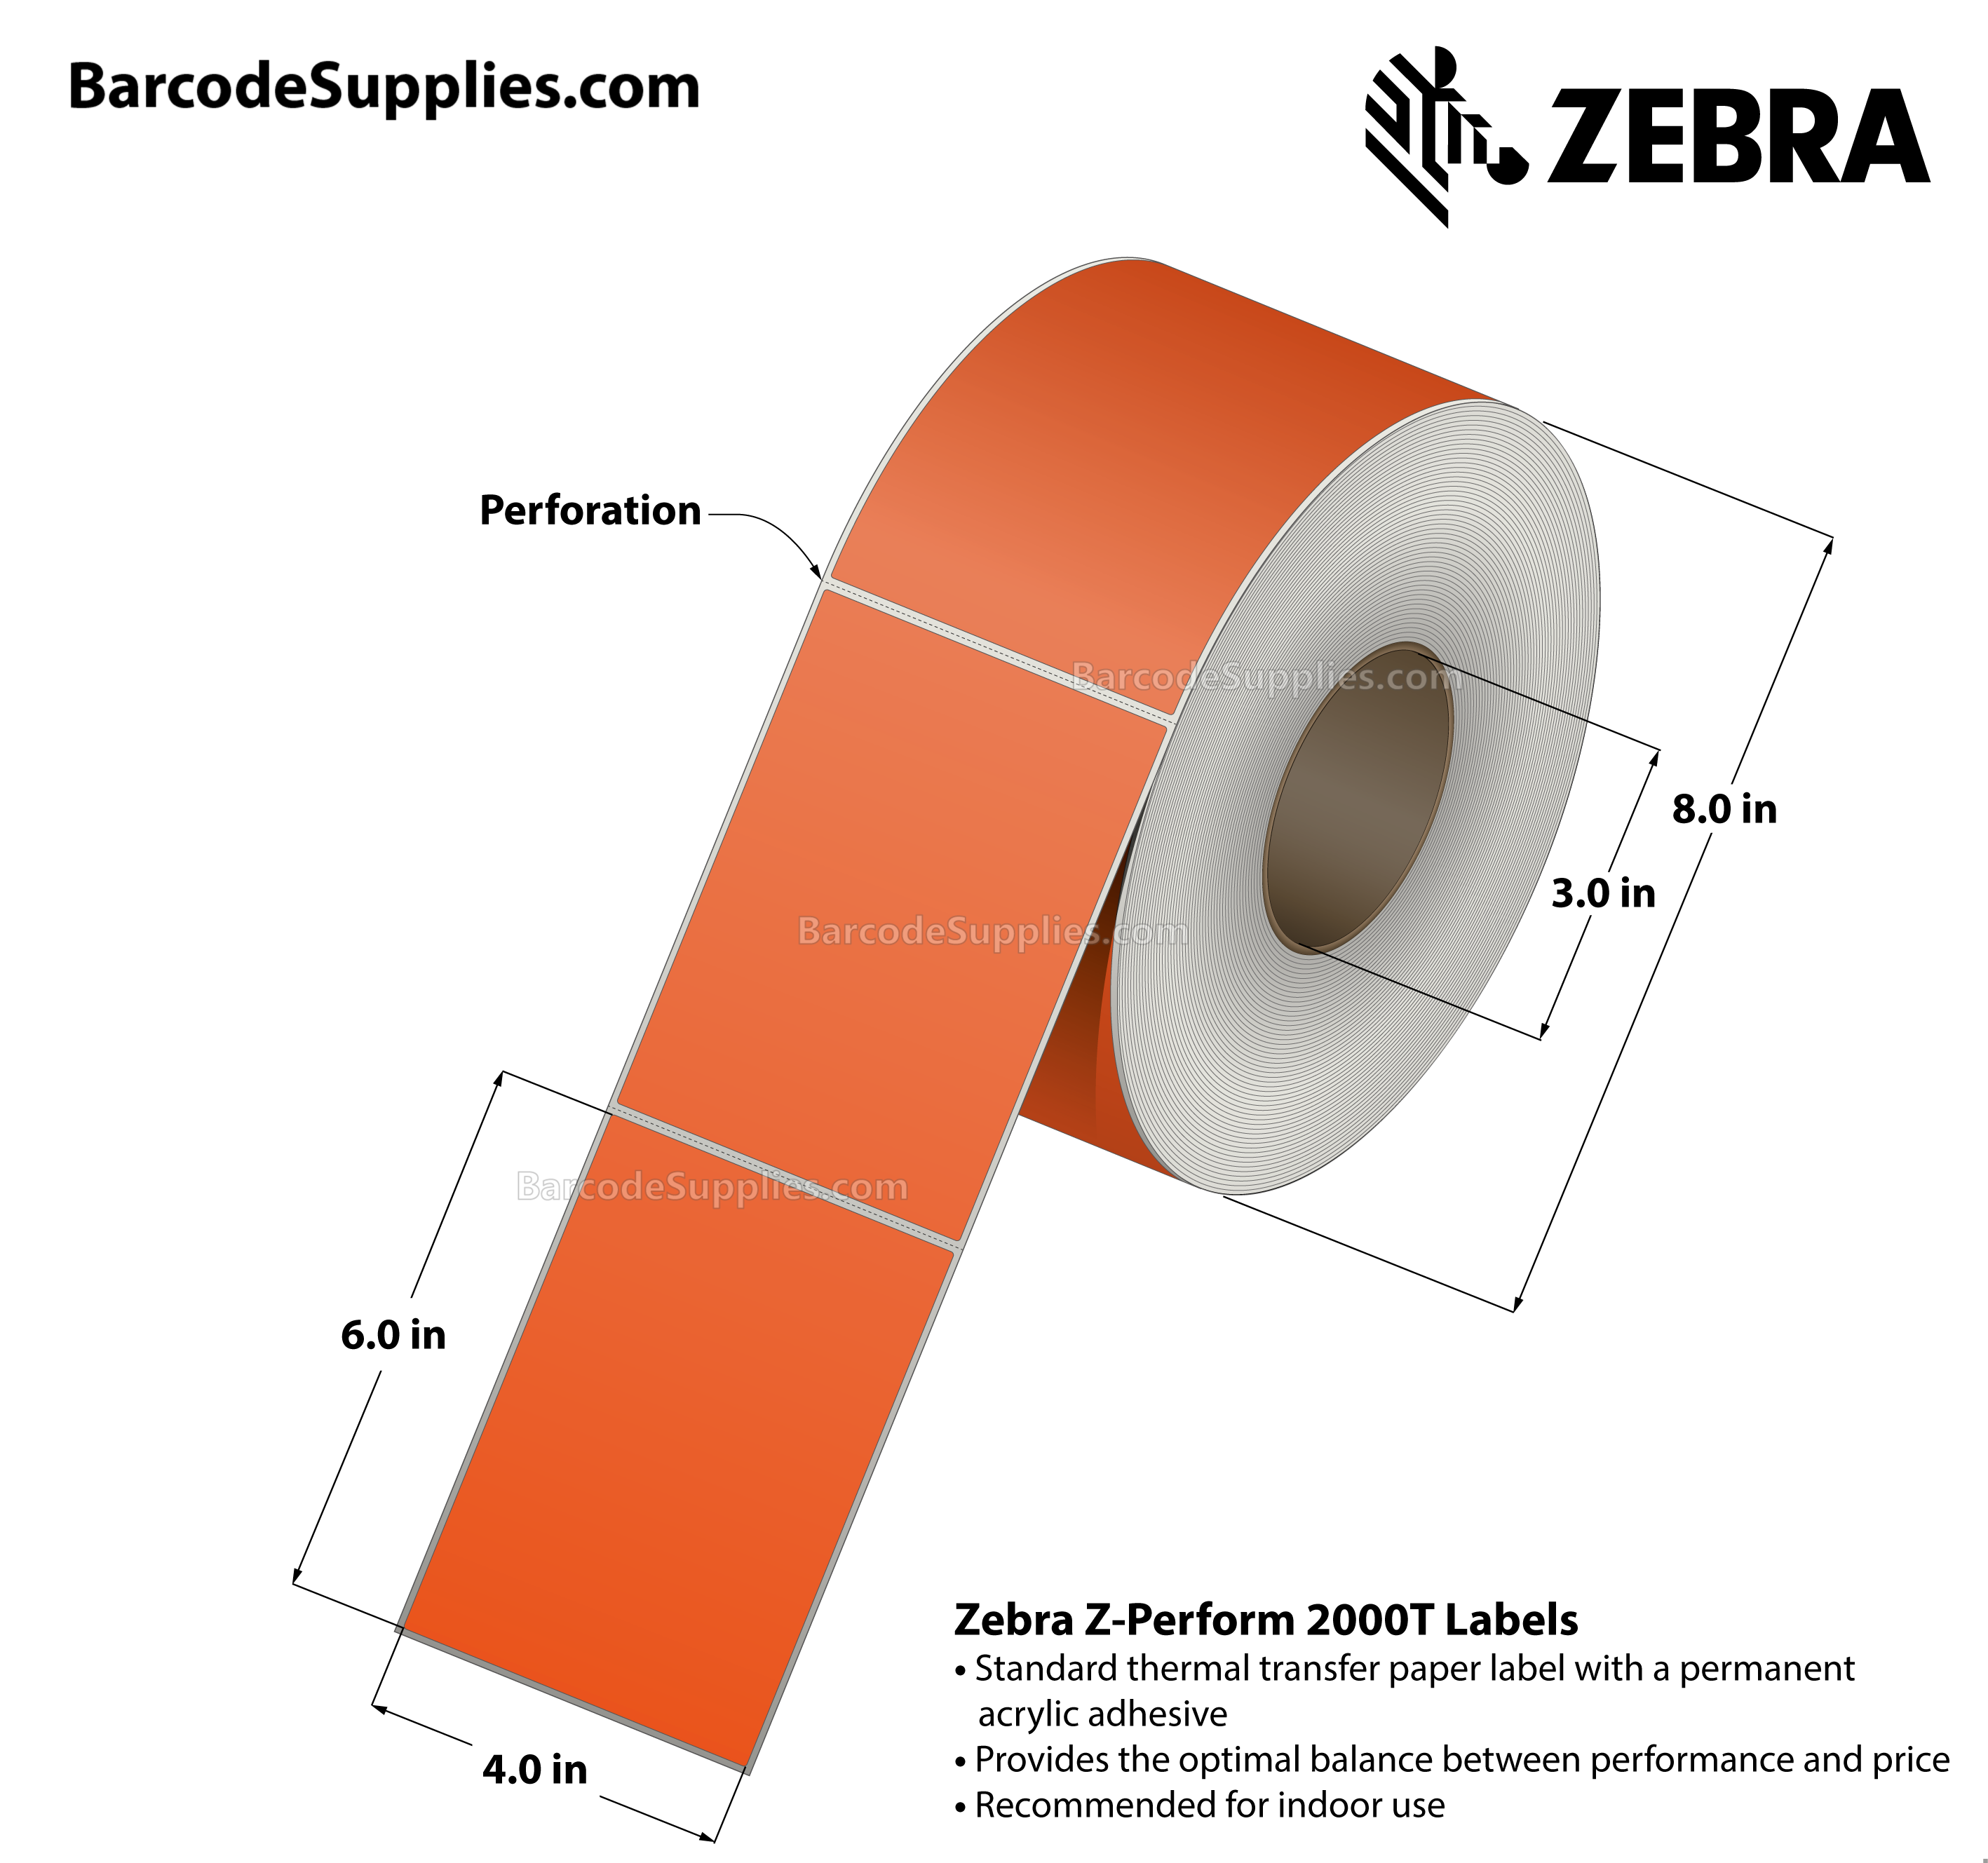 4 x 6 Thermal Transfer Orange - PMS 021 Z-Perform 2000T Floodcoated (Orange) Labels With Permanent Adhesive - Perforated - 1000 Labels Per Roll - Carton Of 4 Rolls - 4000 Labels Total - MPN: 10006208-4